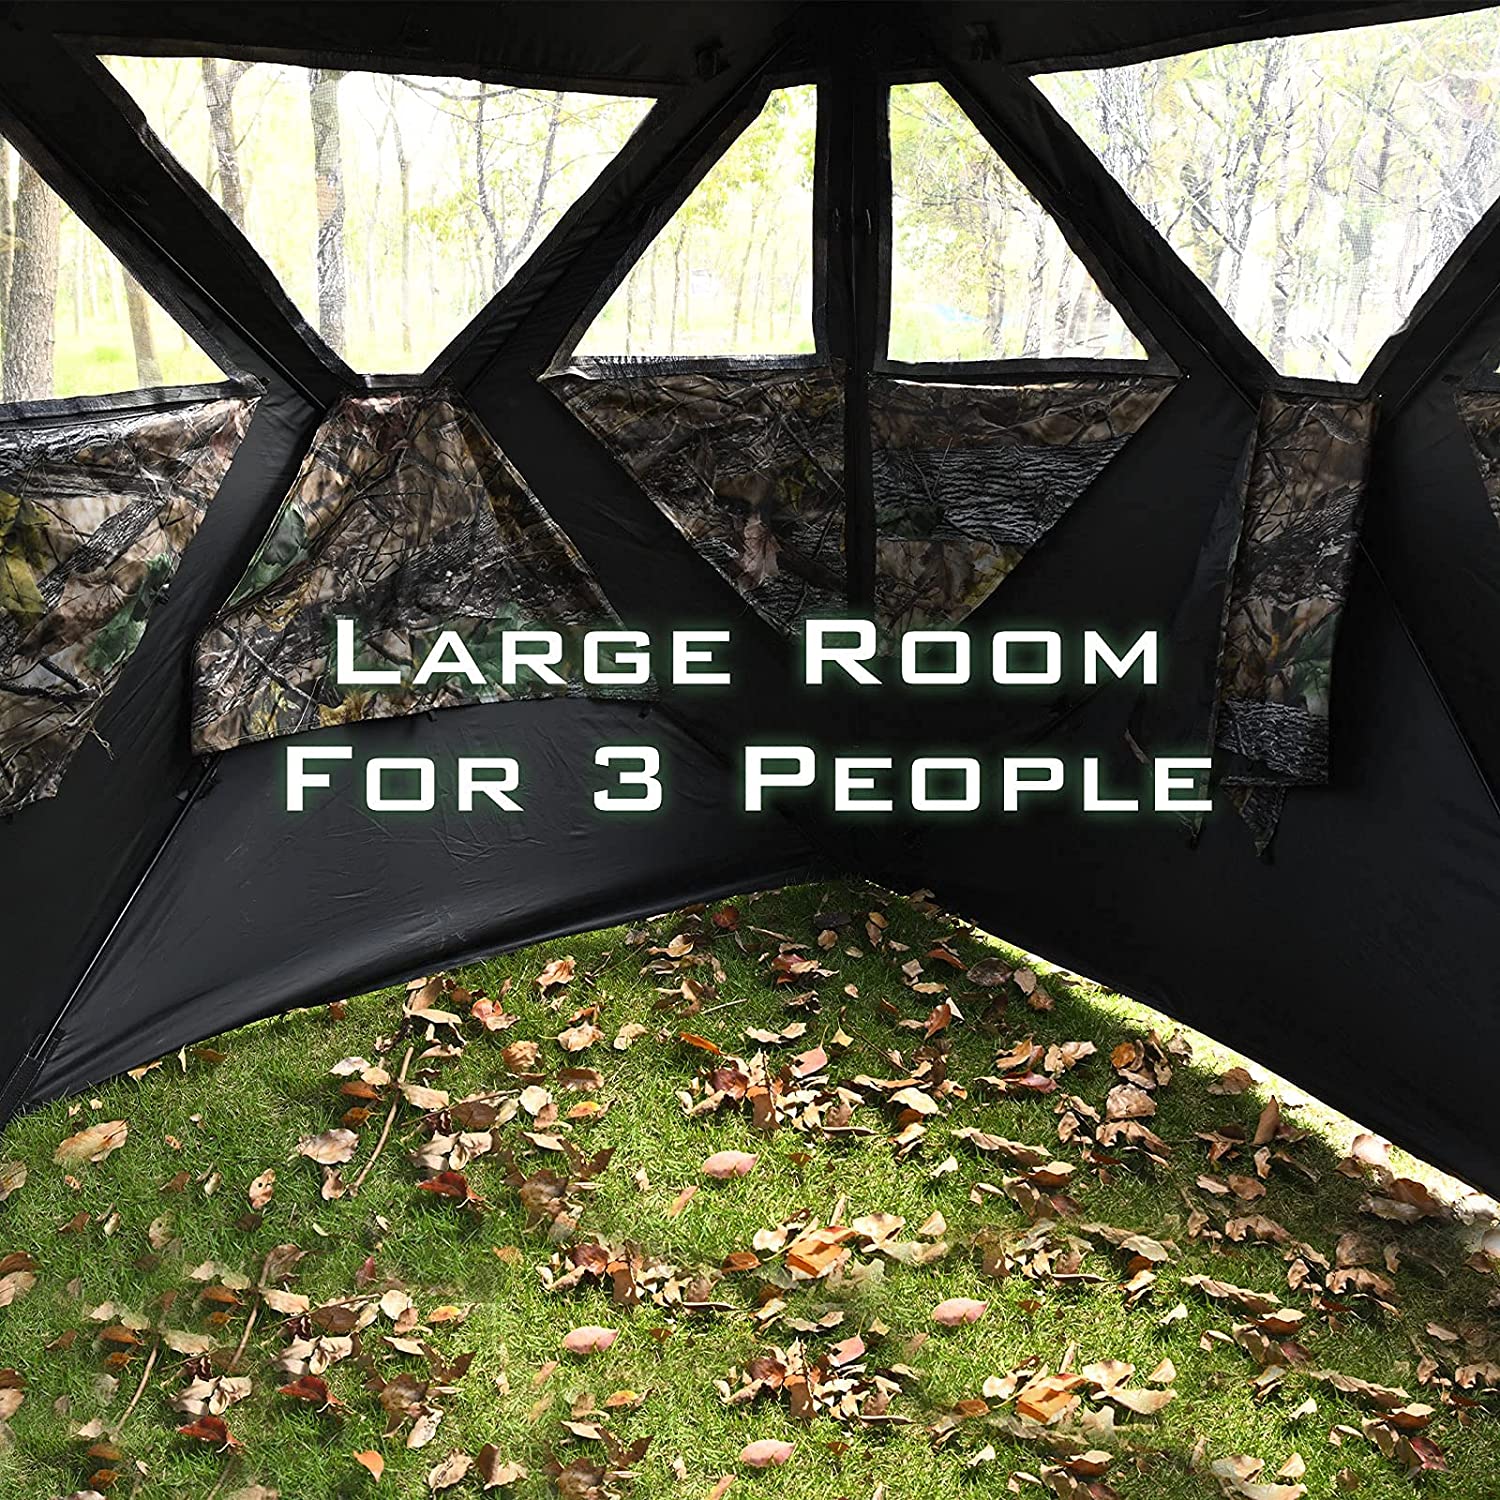 Chairliving 3 Person Pop up Ground Camo Deer Blind Portable Camouflage Hunting Blind Tent with 360 Degree Mesh Windows Carrying Bag 